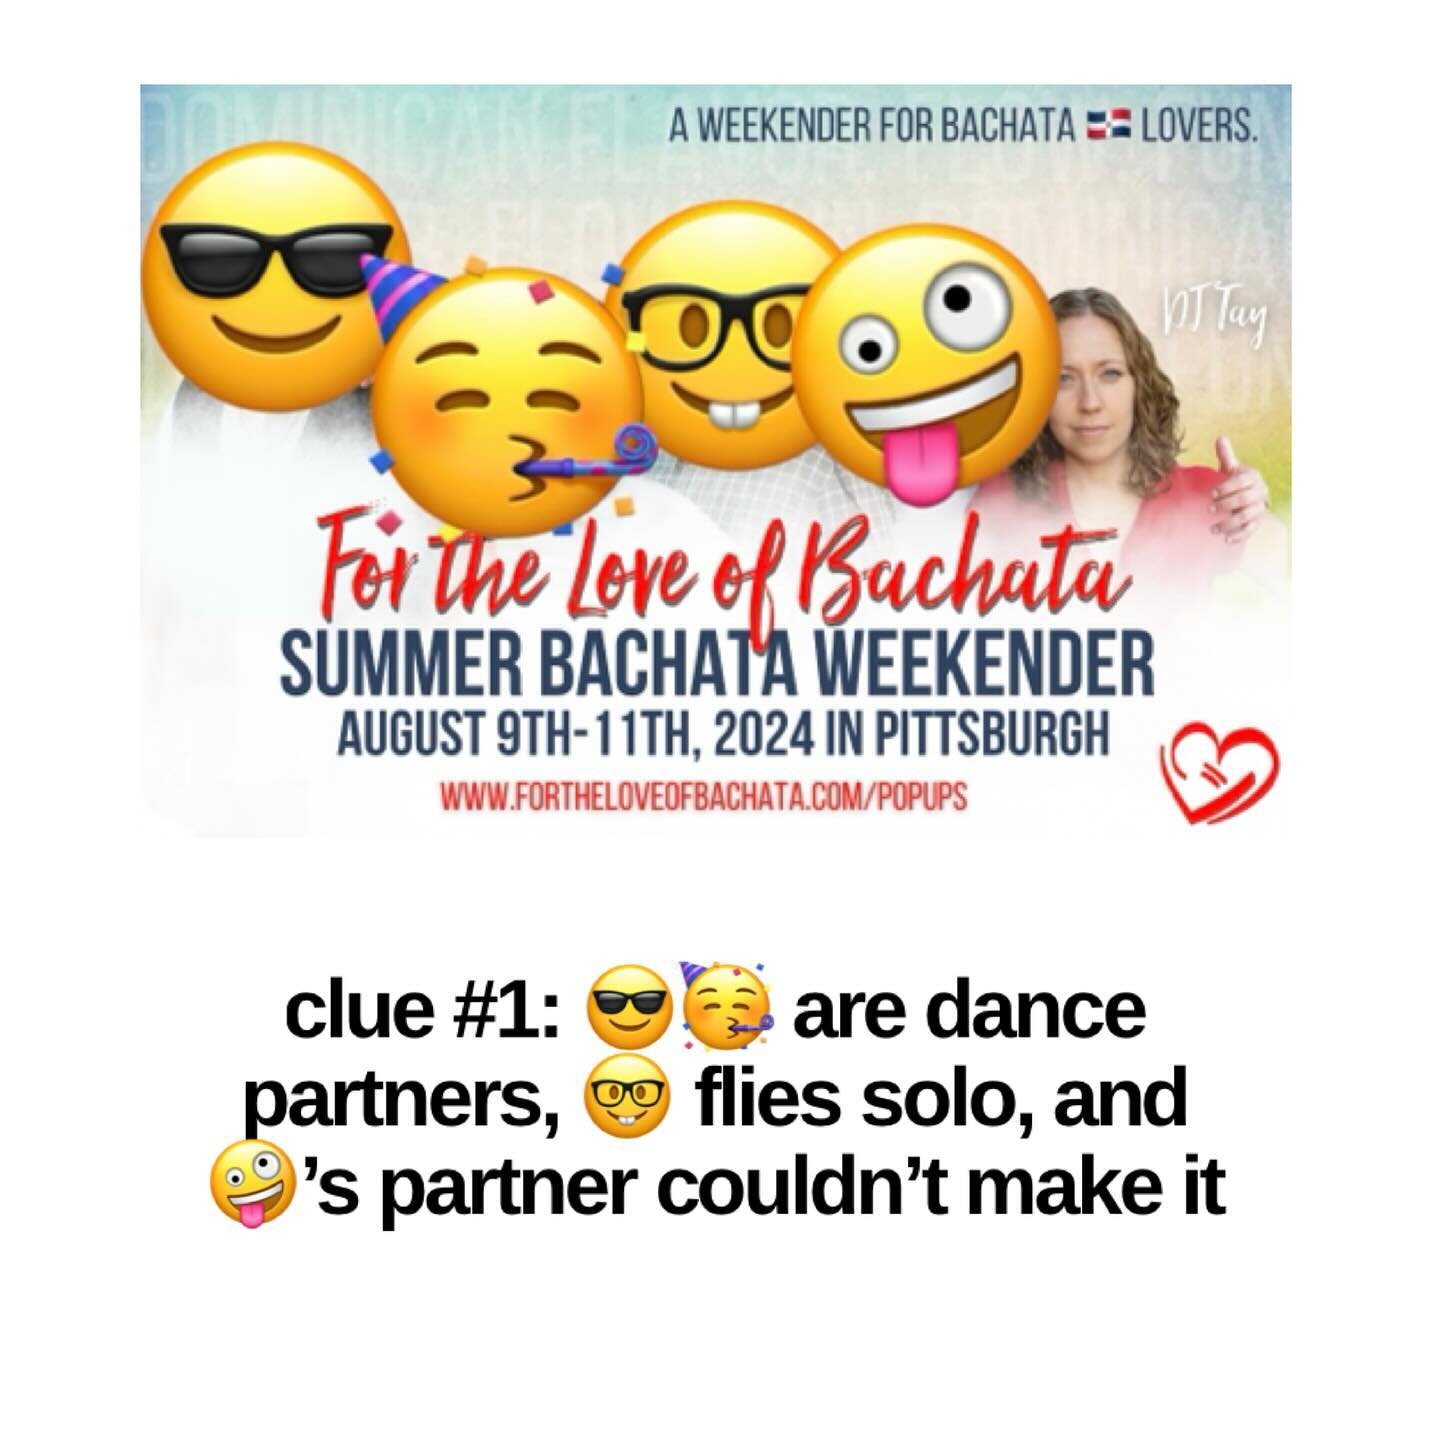 I will be releasing the answers soon, but I figured I would update my clues to be more specific - match the emoji heads for more specific clues! 

Feel free to ask questions below like &ldquo;are 🥳😎 from XYZ?&rdquo; Or does &ldquo;🤓 teach ABC?&rdq